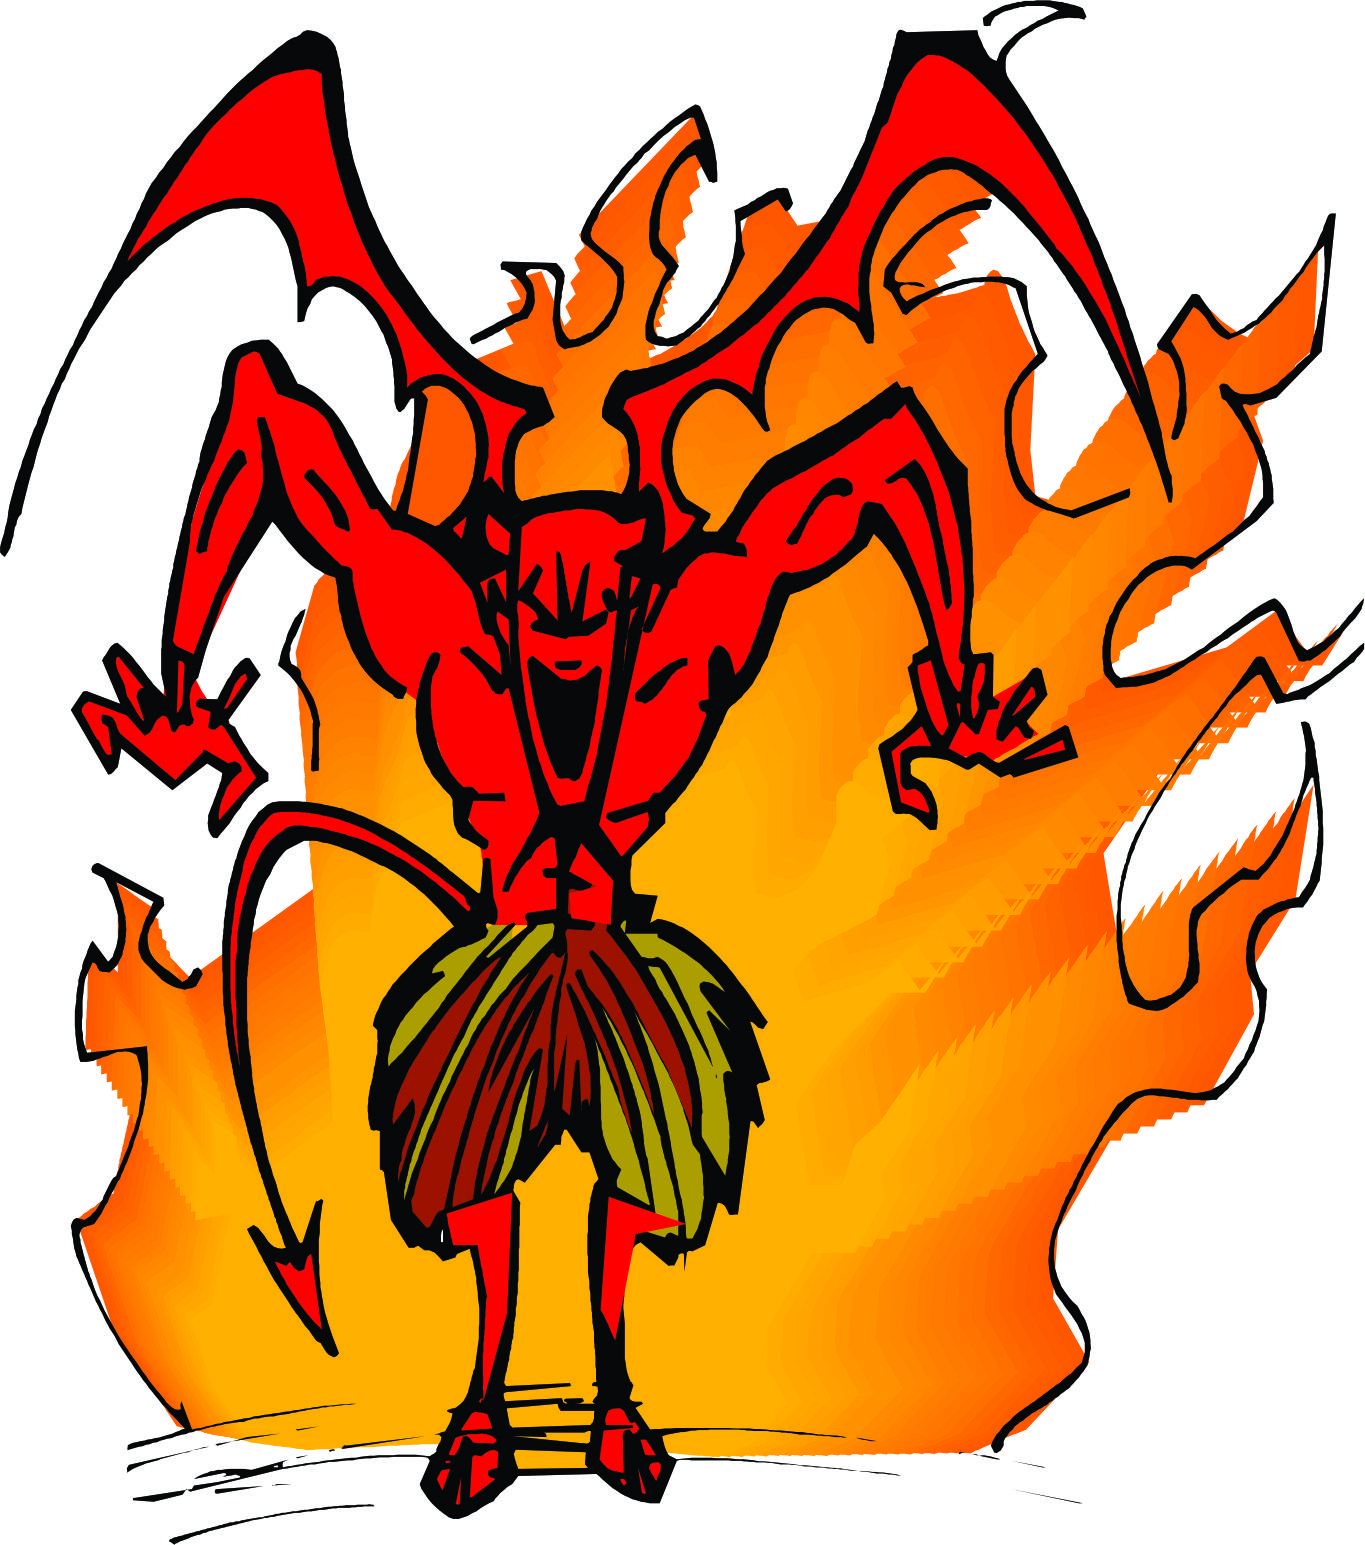 View larger image · Devil with fire